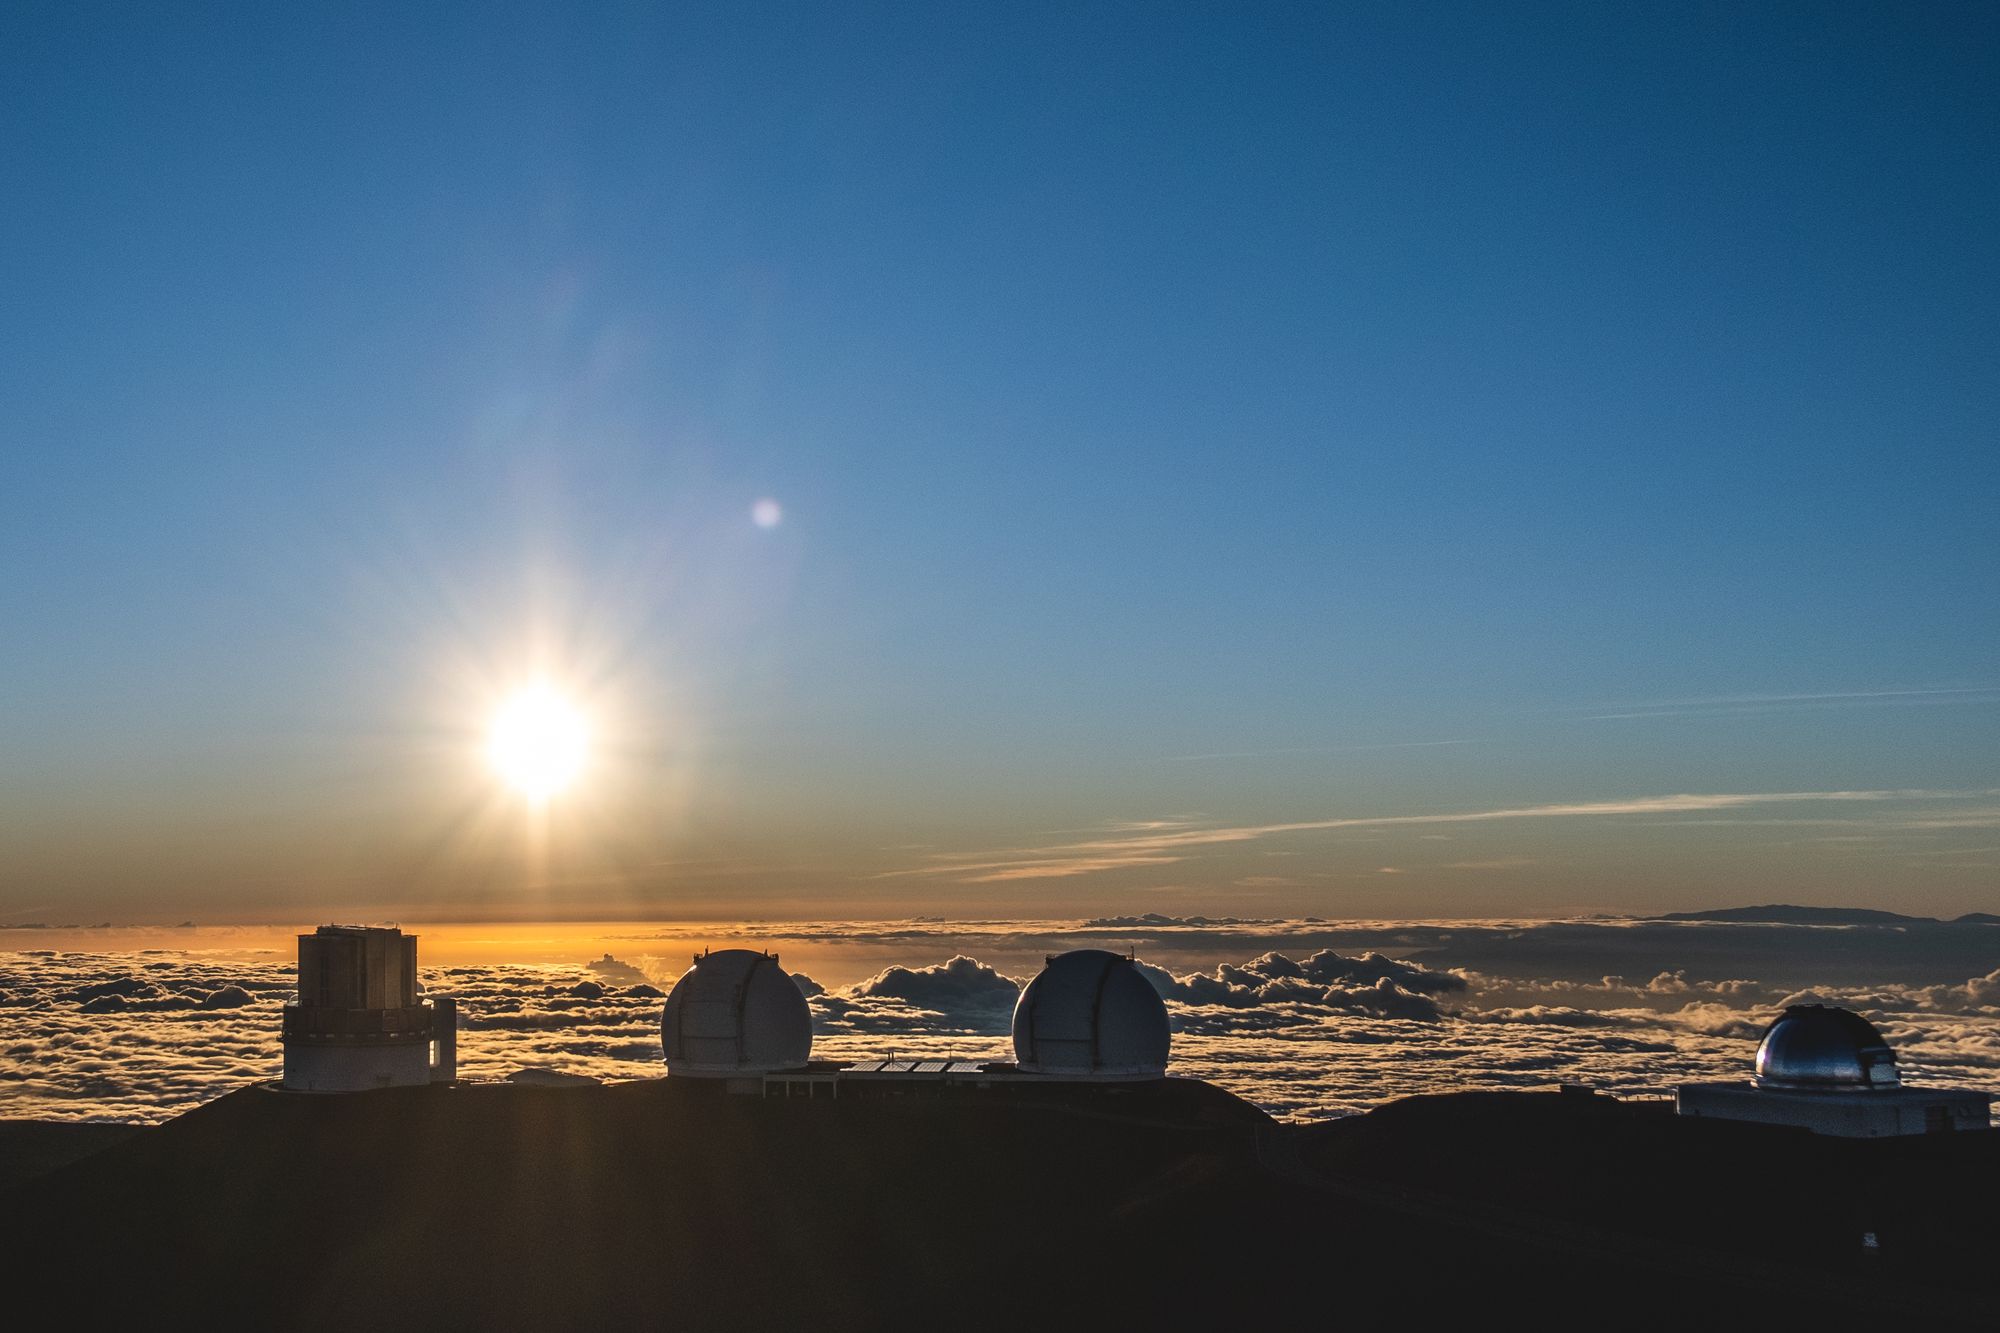 A photo of the sun setting on the horizon, with clouds directly in front. In the foreground are 4 large telescope facilities used for night sky gazing and other astrophysics research.